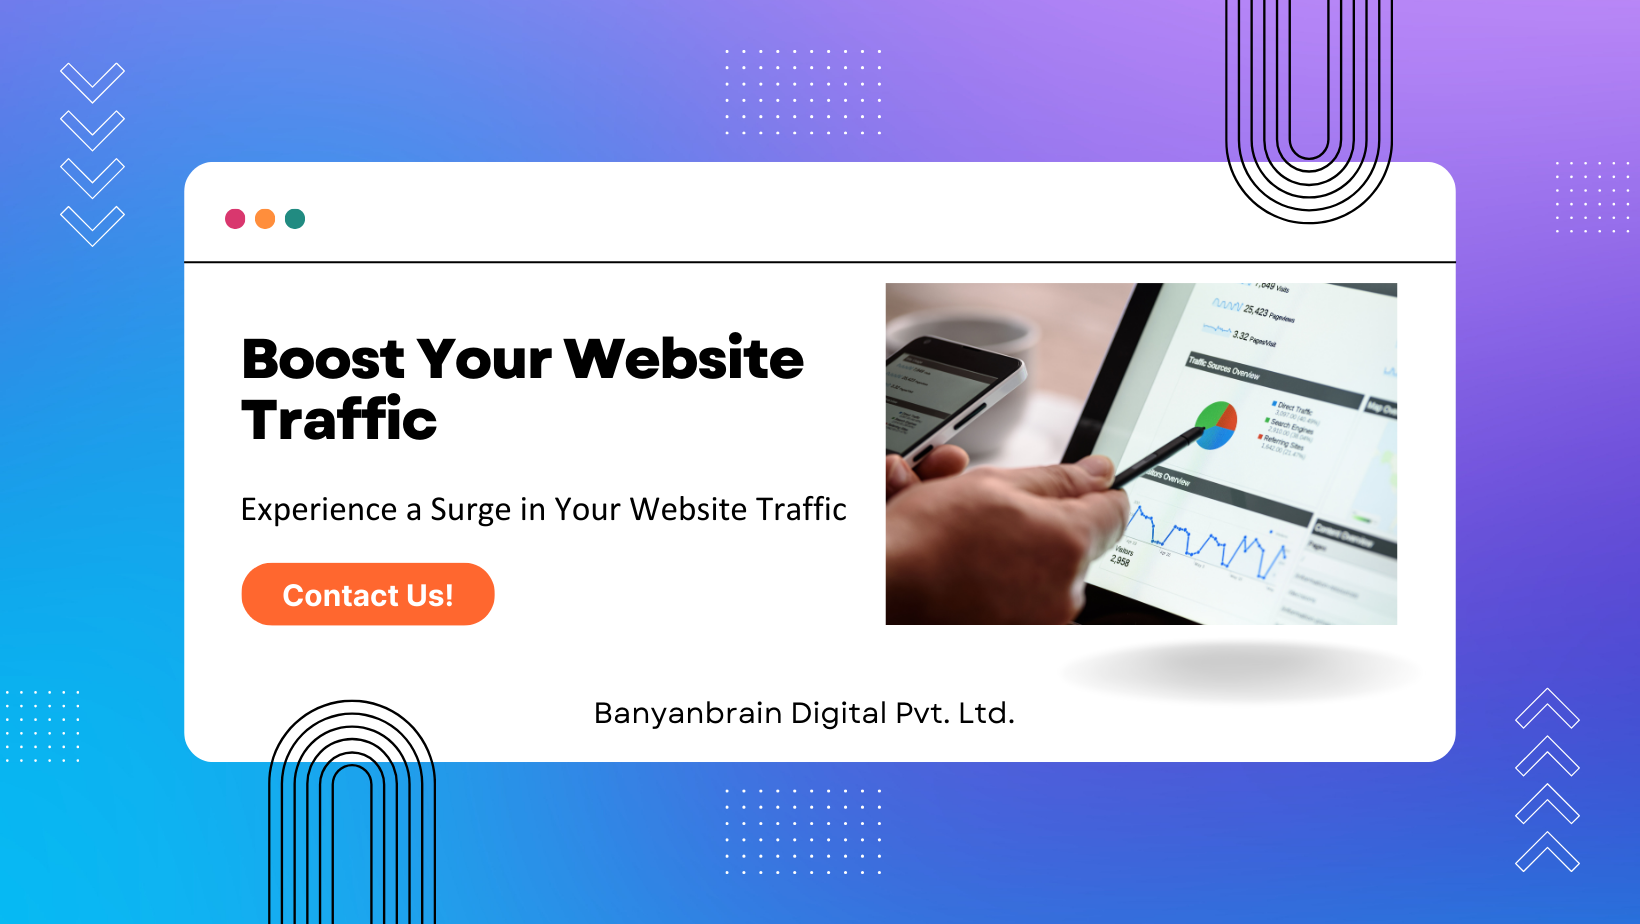 Banyanbrain use keywords to drive traffic to your website. Contact us today!